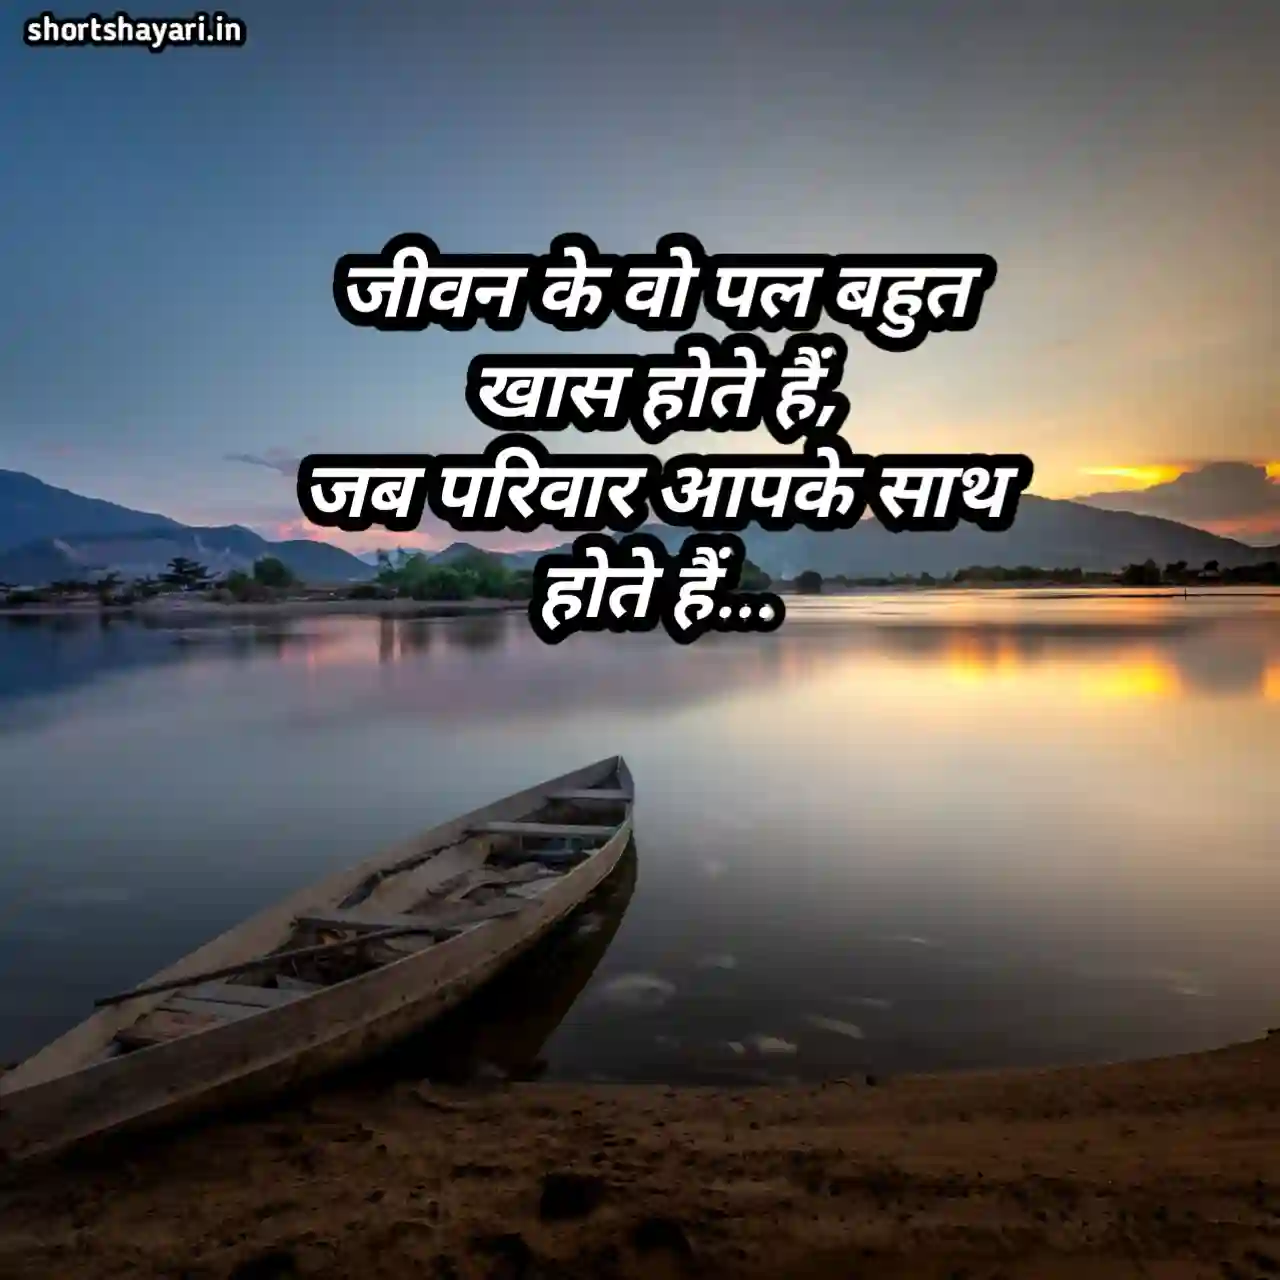 Incredible Compilation: Extensive Collection of 999+ Beautiful Hindi Quotes Images in Full 4K